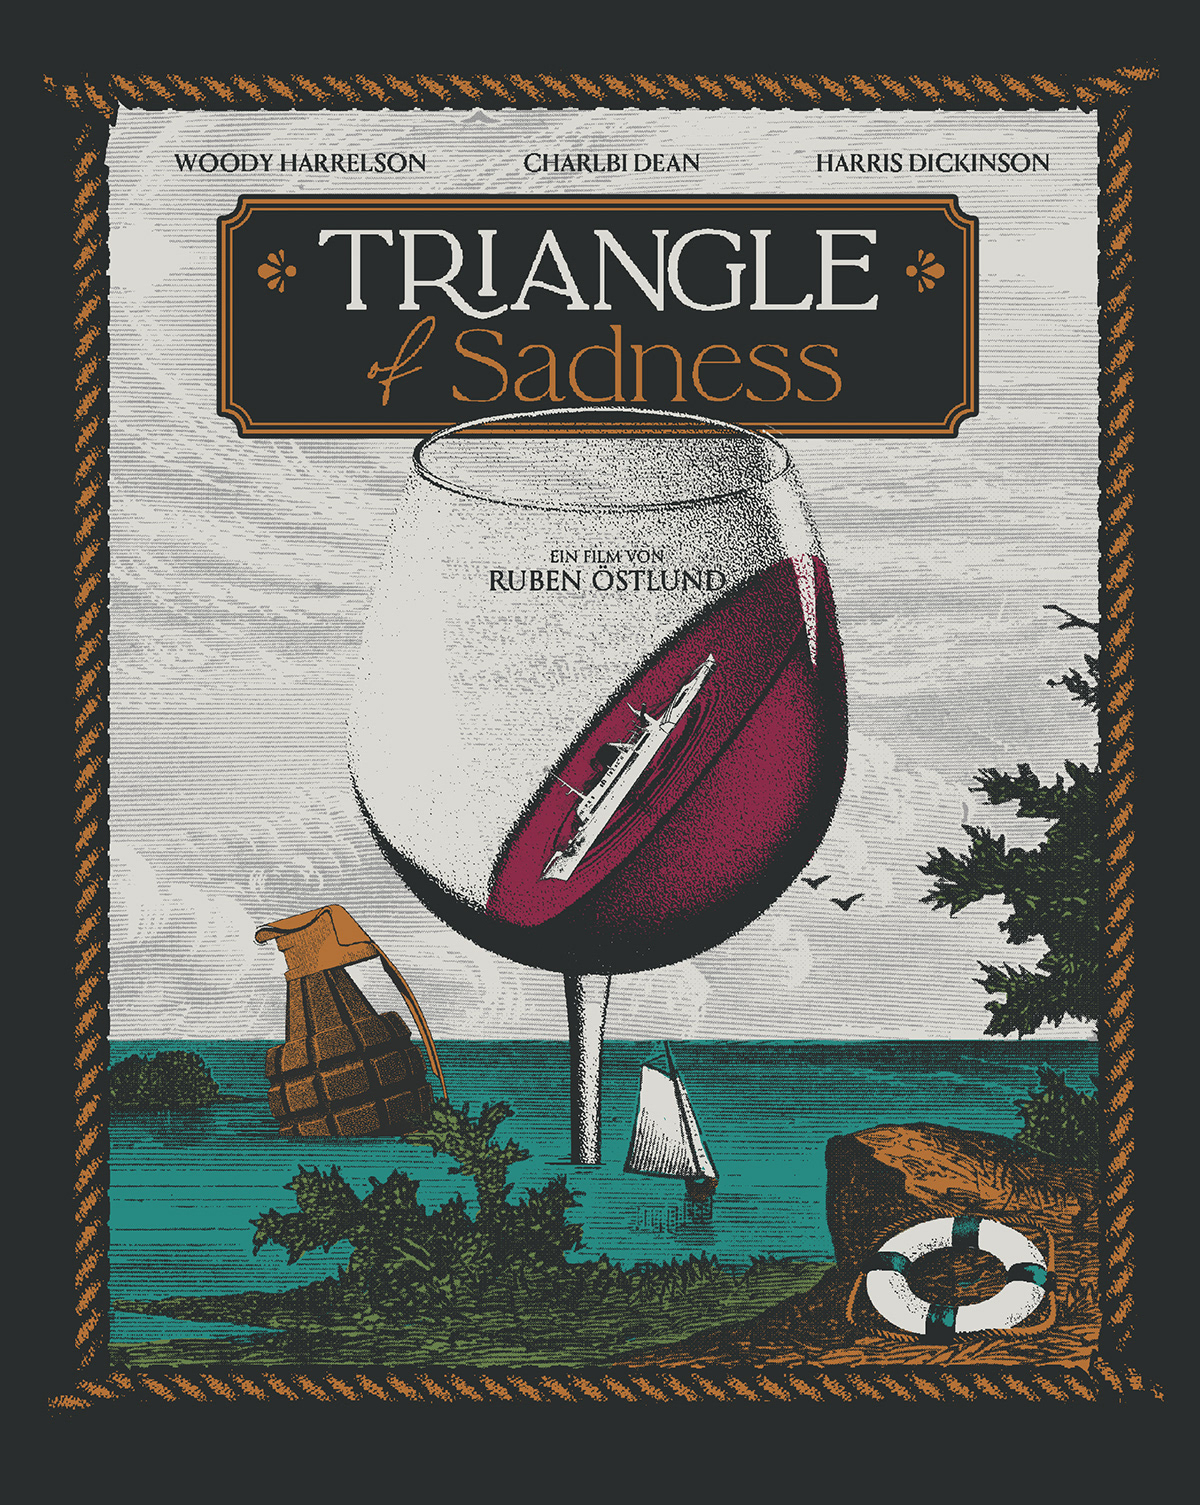 Triangle of Sadness poster